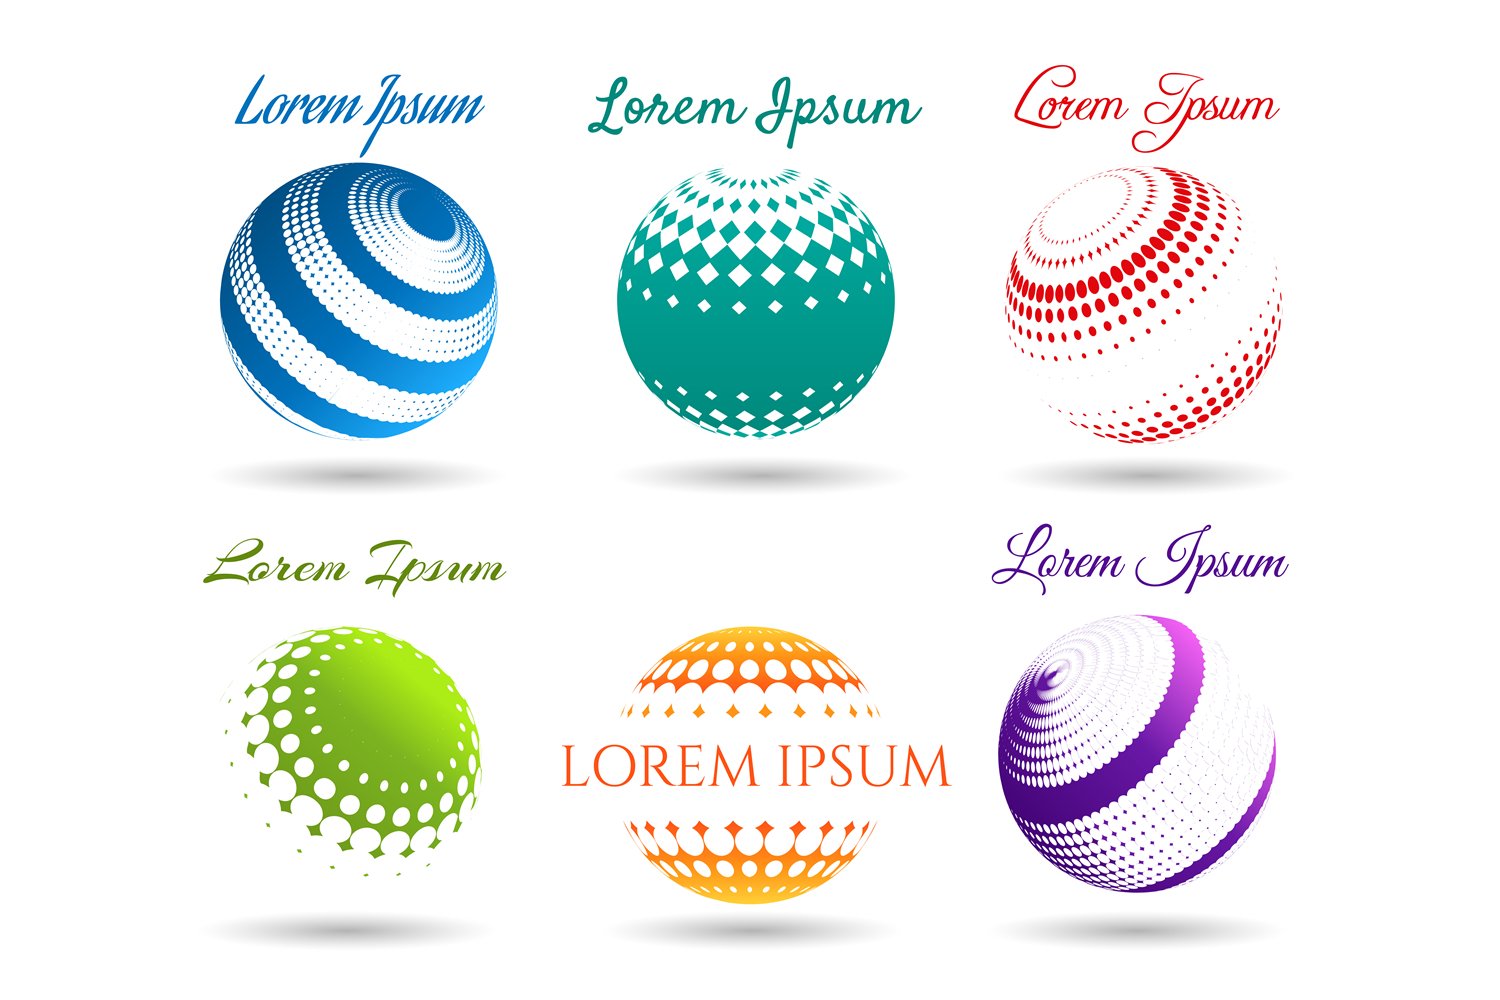 A set of 6 different abstract 3D dot spheres logo in blue, turquoise, red, green, orange and purple colors on a white background.